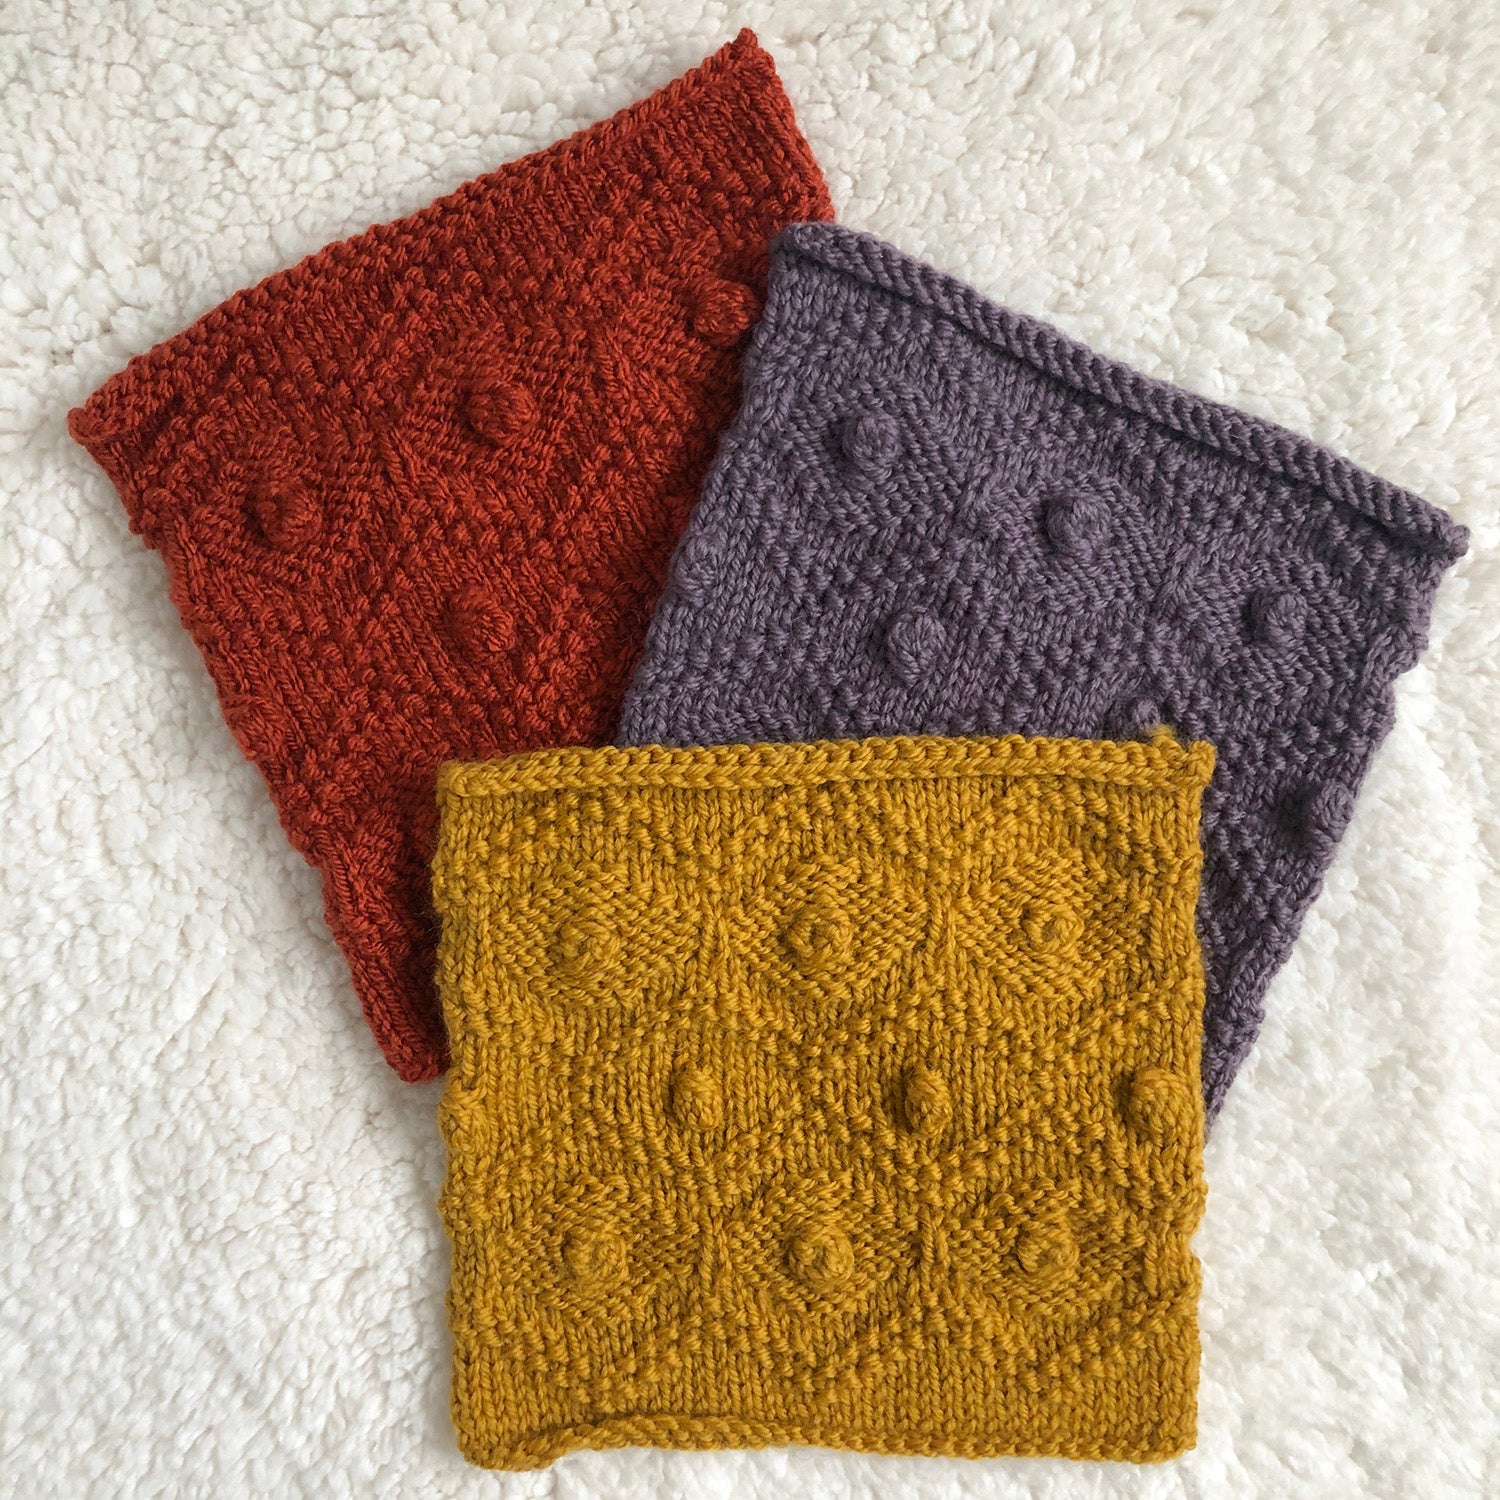 Week 6 Mustard Lane - A Day Out Knit Along Blanket by Sarah Hatton - No turn bobble